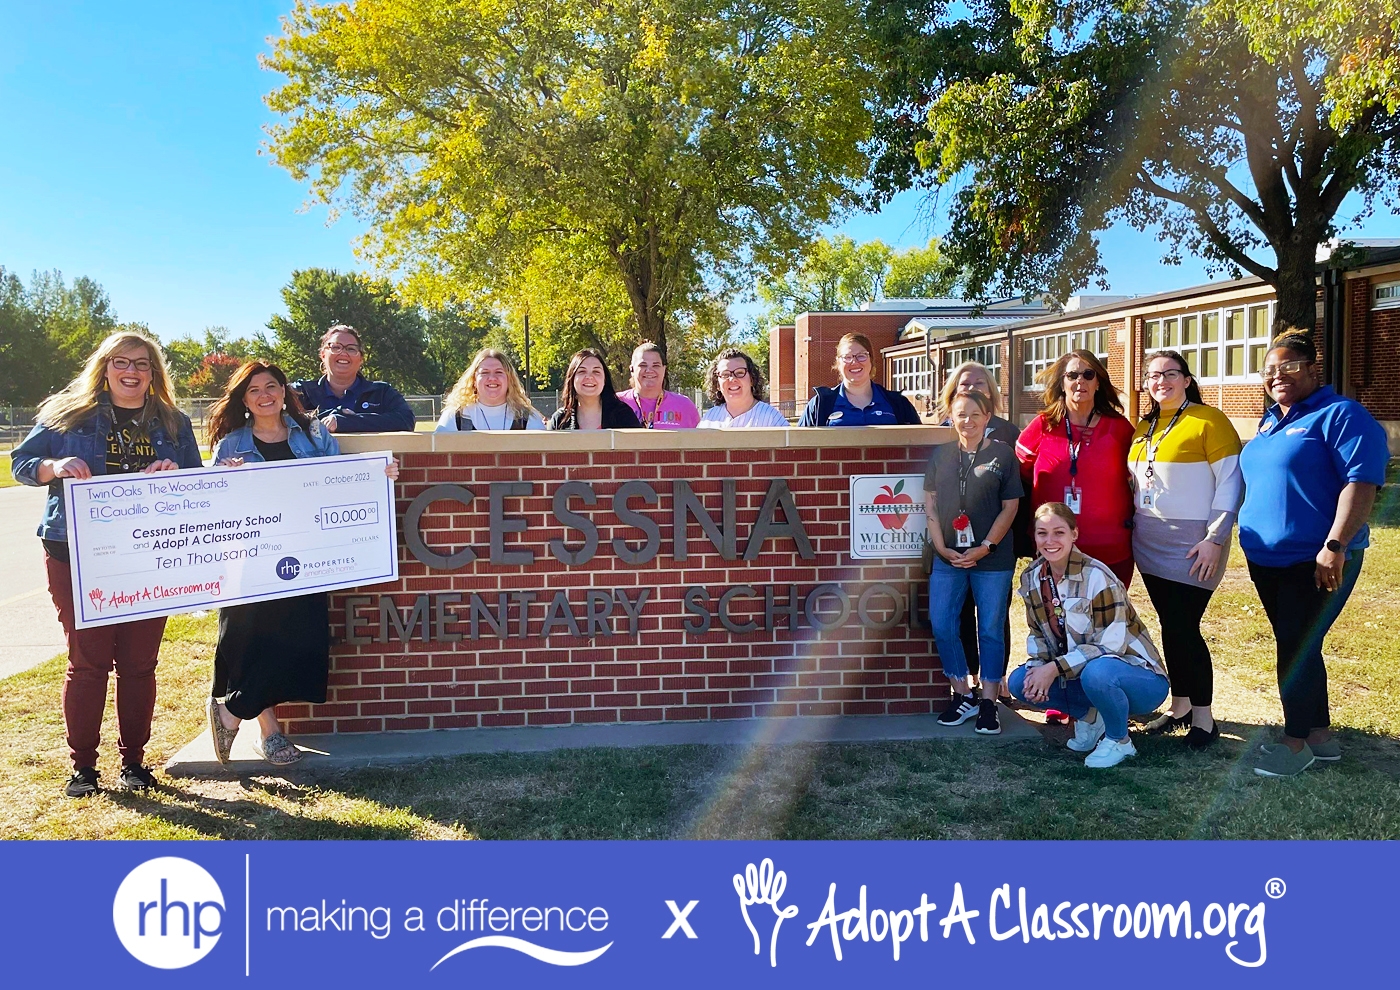 RHP Properties expands academic initiatives to additional schools through AdoptAClassroon.org partnership